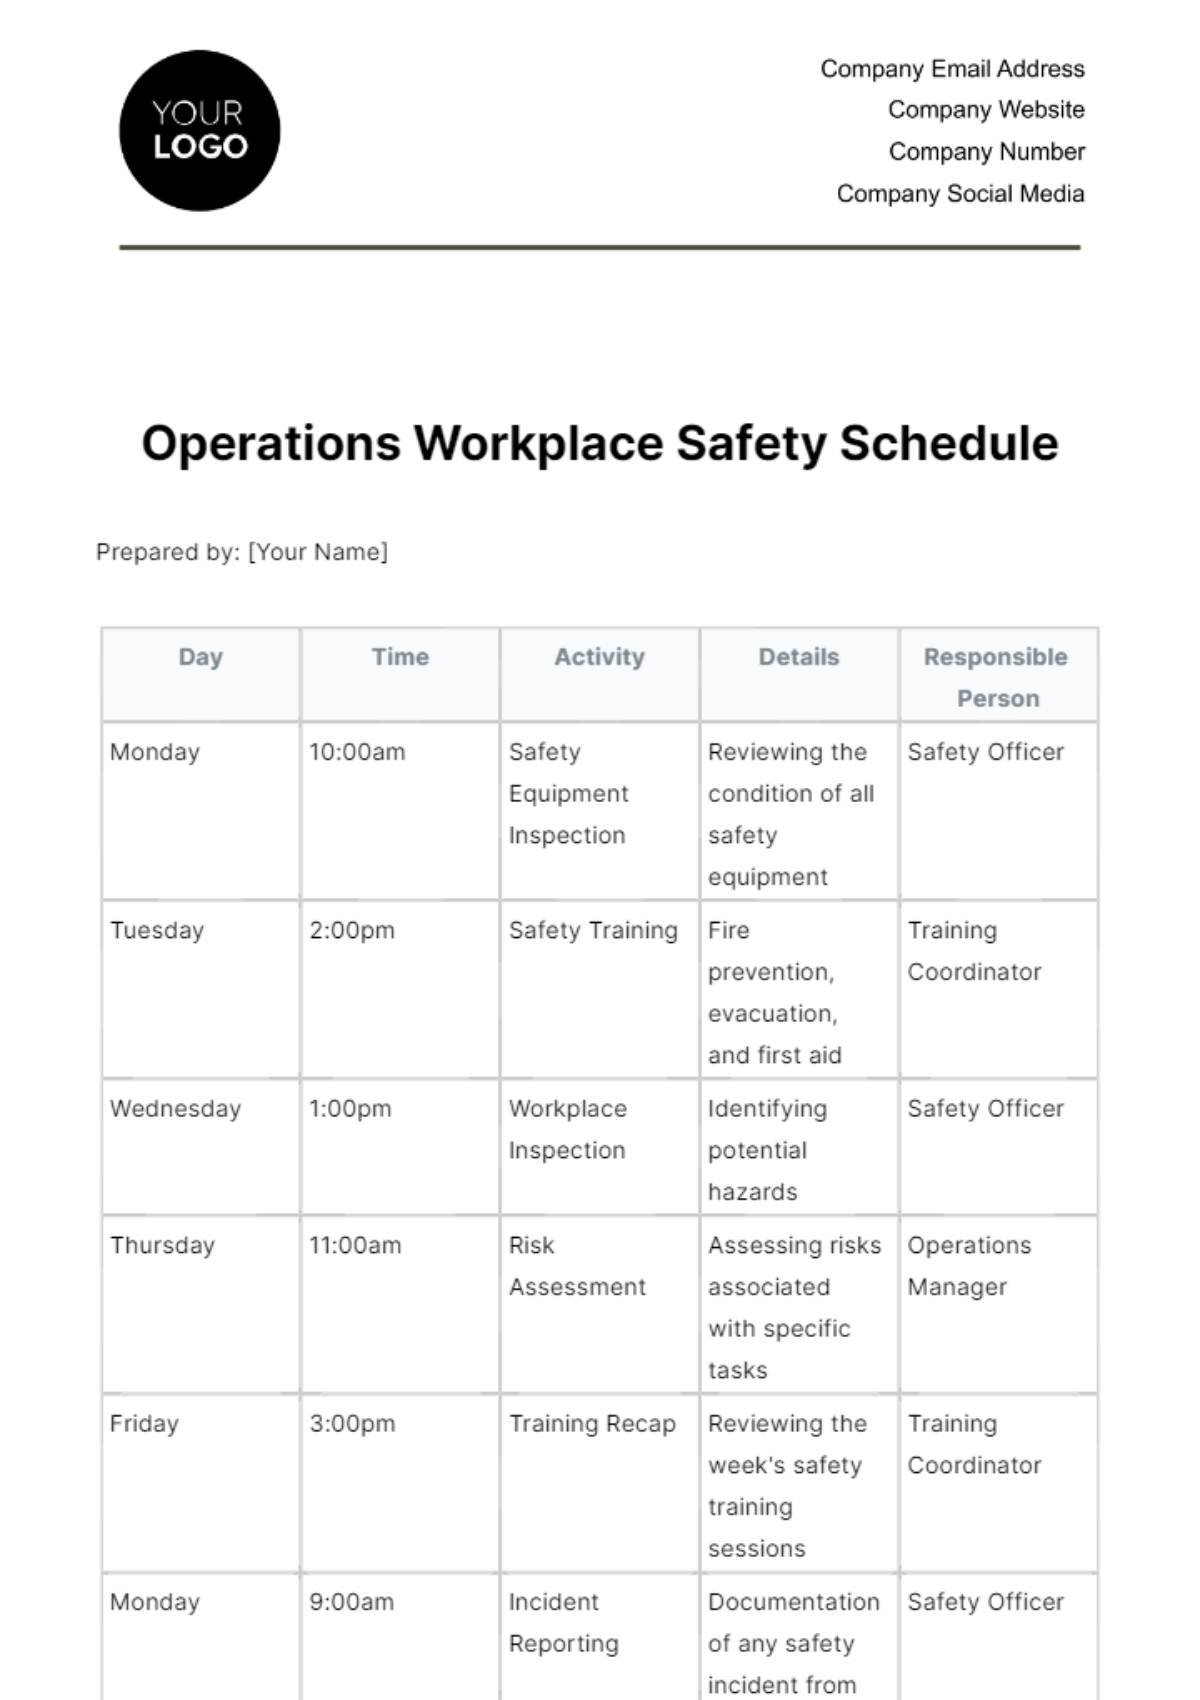 Operations Workplace Safety Schedule Template